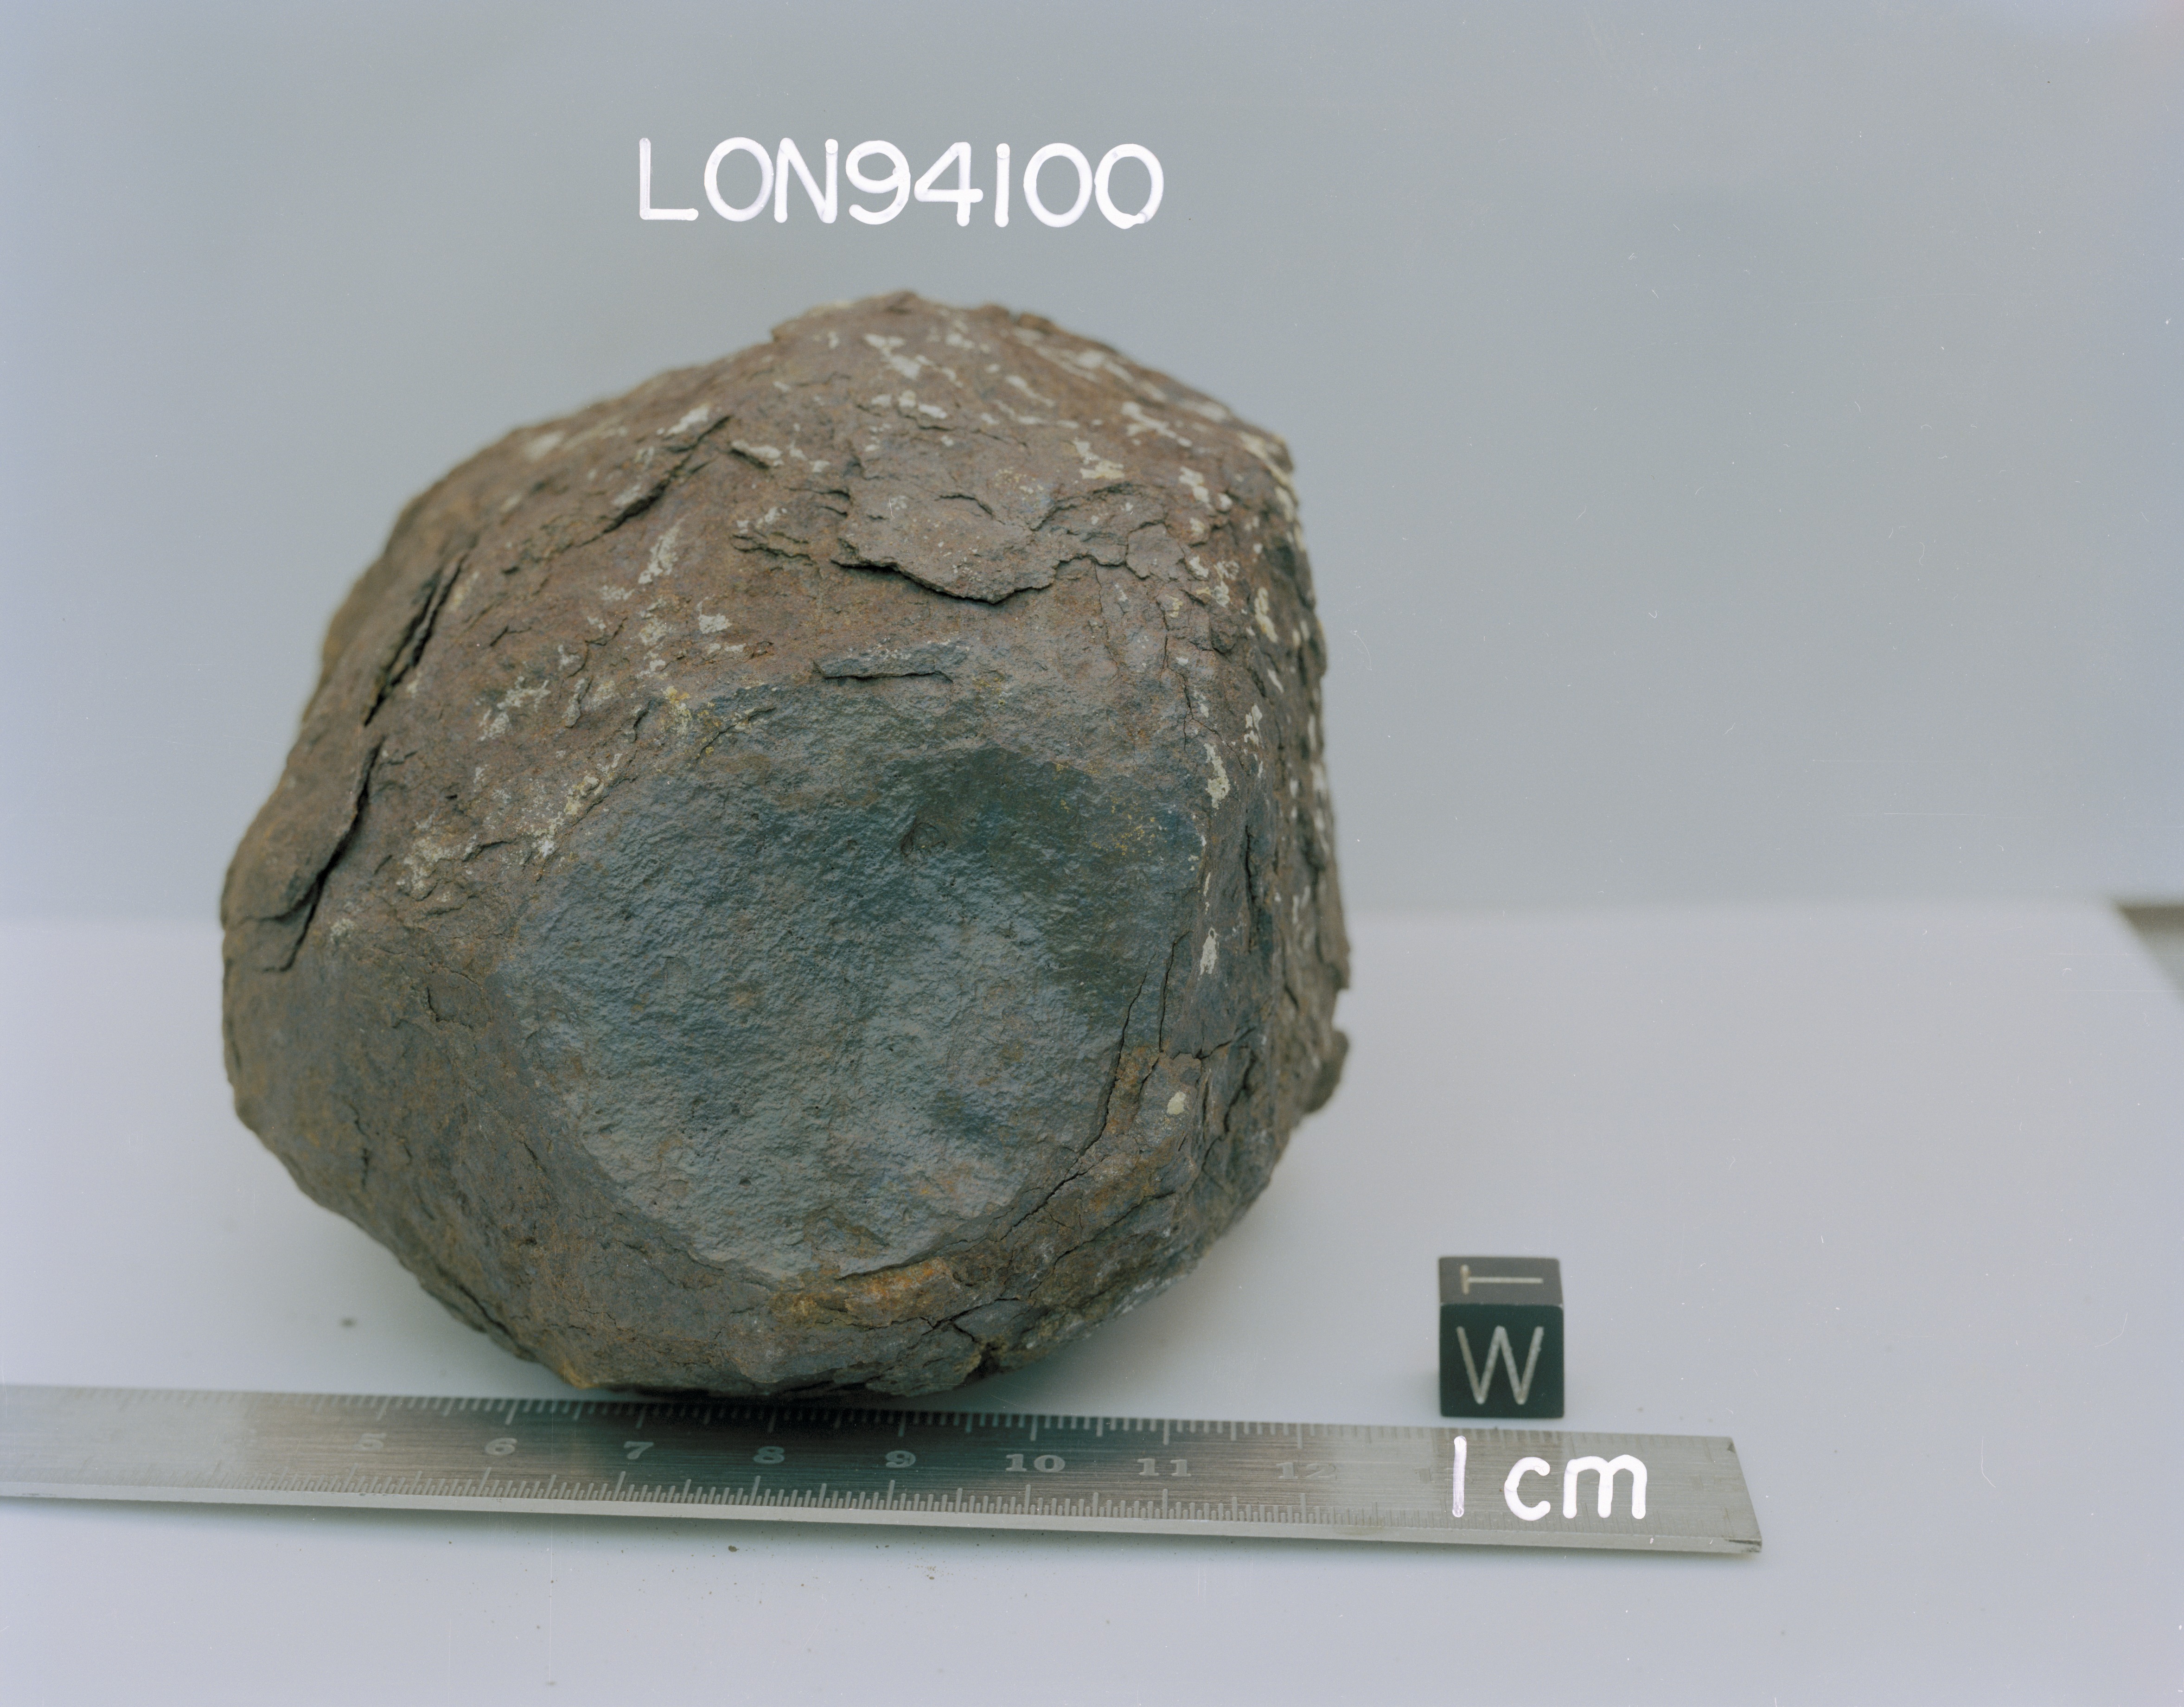 Lab Photo of Sample LON 94100 (Photo Number S95-14599)